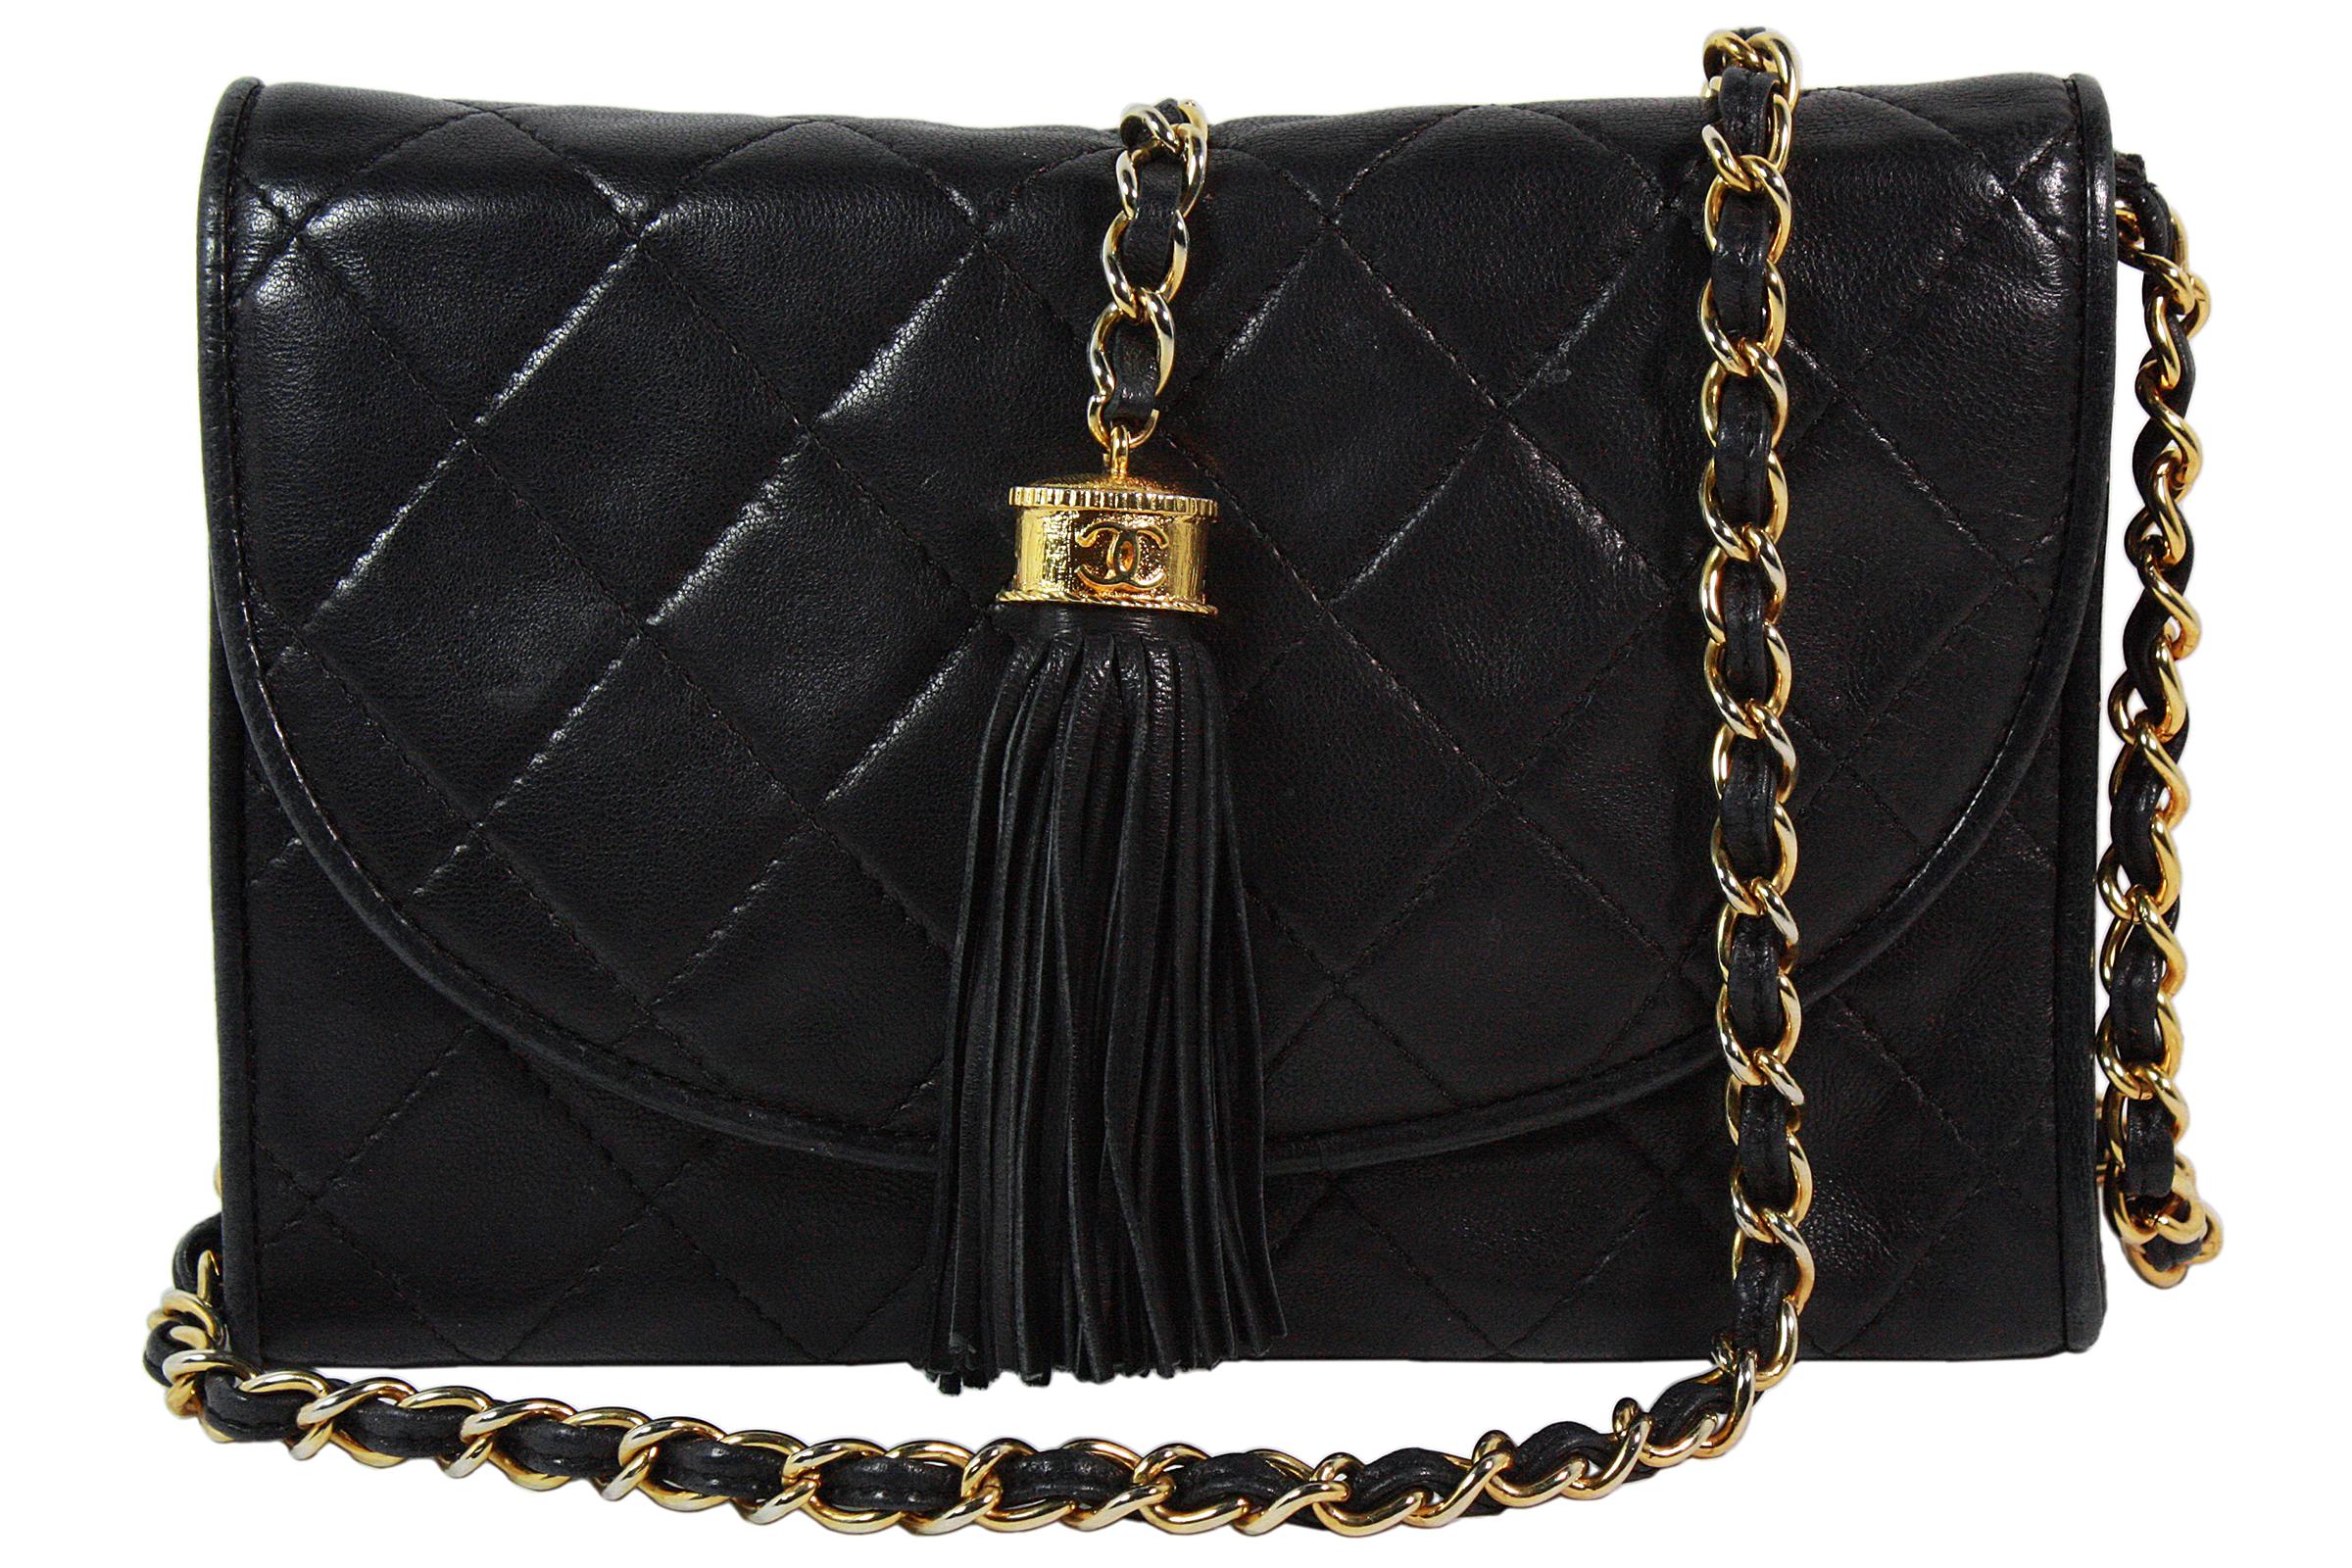 Chanel crossbody bag
Made in Italy
Soft black quilted leather 
Hanging tassel with gold chain and CC logo 
Gold and leather chain strap that can be stored inside to make bag a clutch
Strap length: 38 inches 
Black leather lining 
Interior zippered